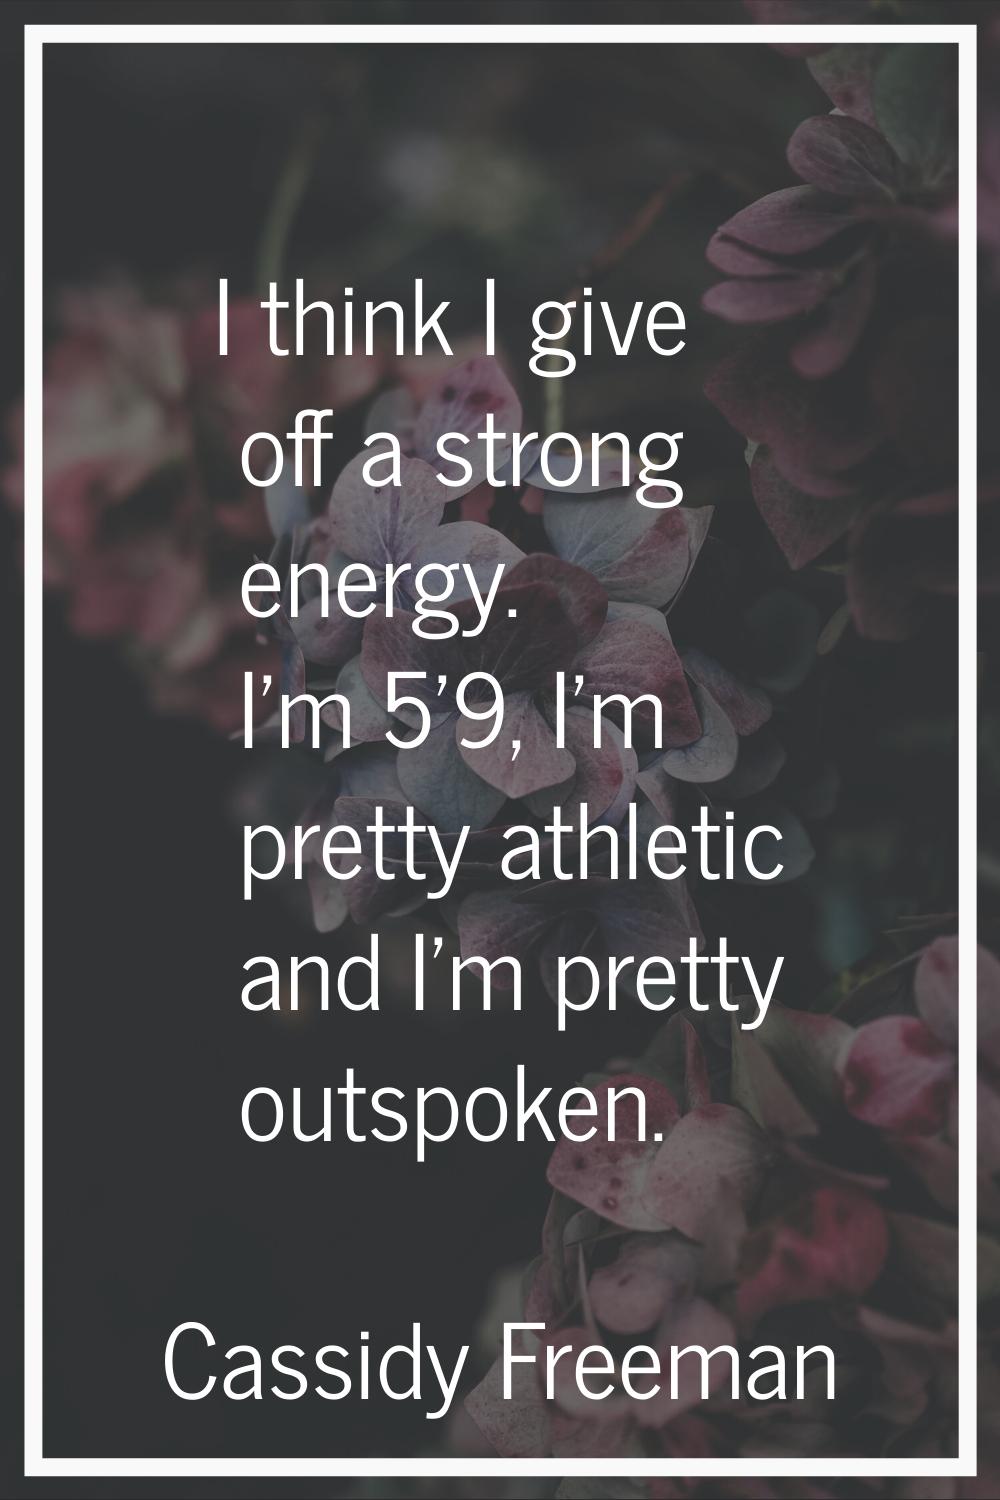 I think I give off a strong energy. I'm 5'9, I'm pretty athletic and I'm pretty outspoken.